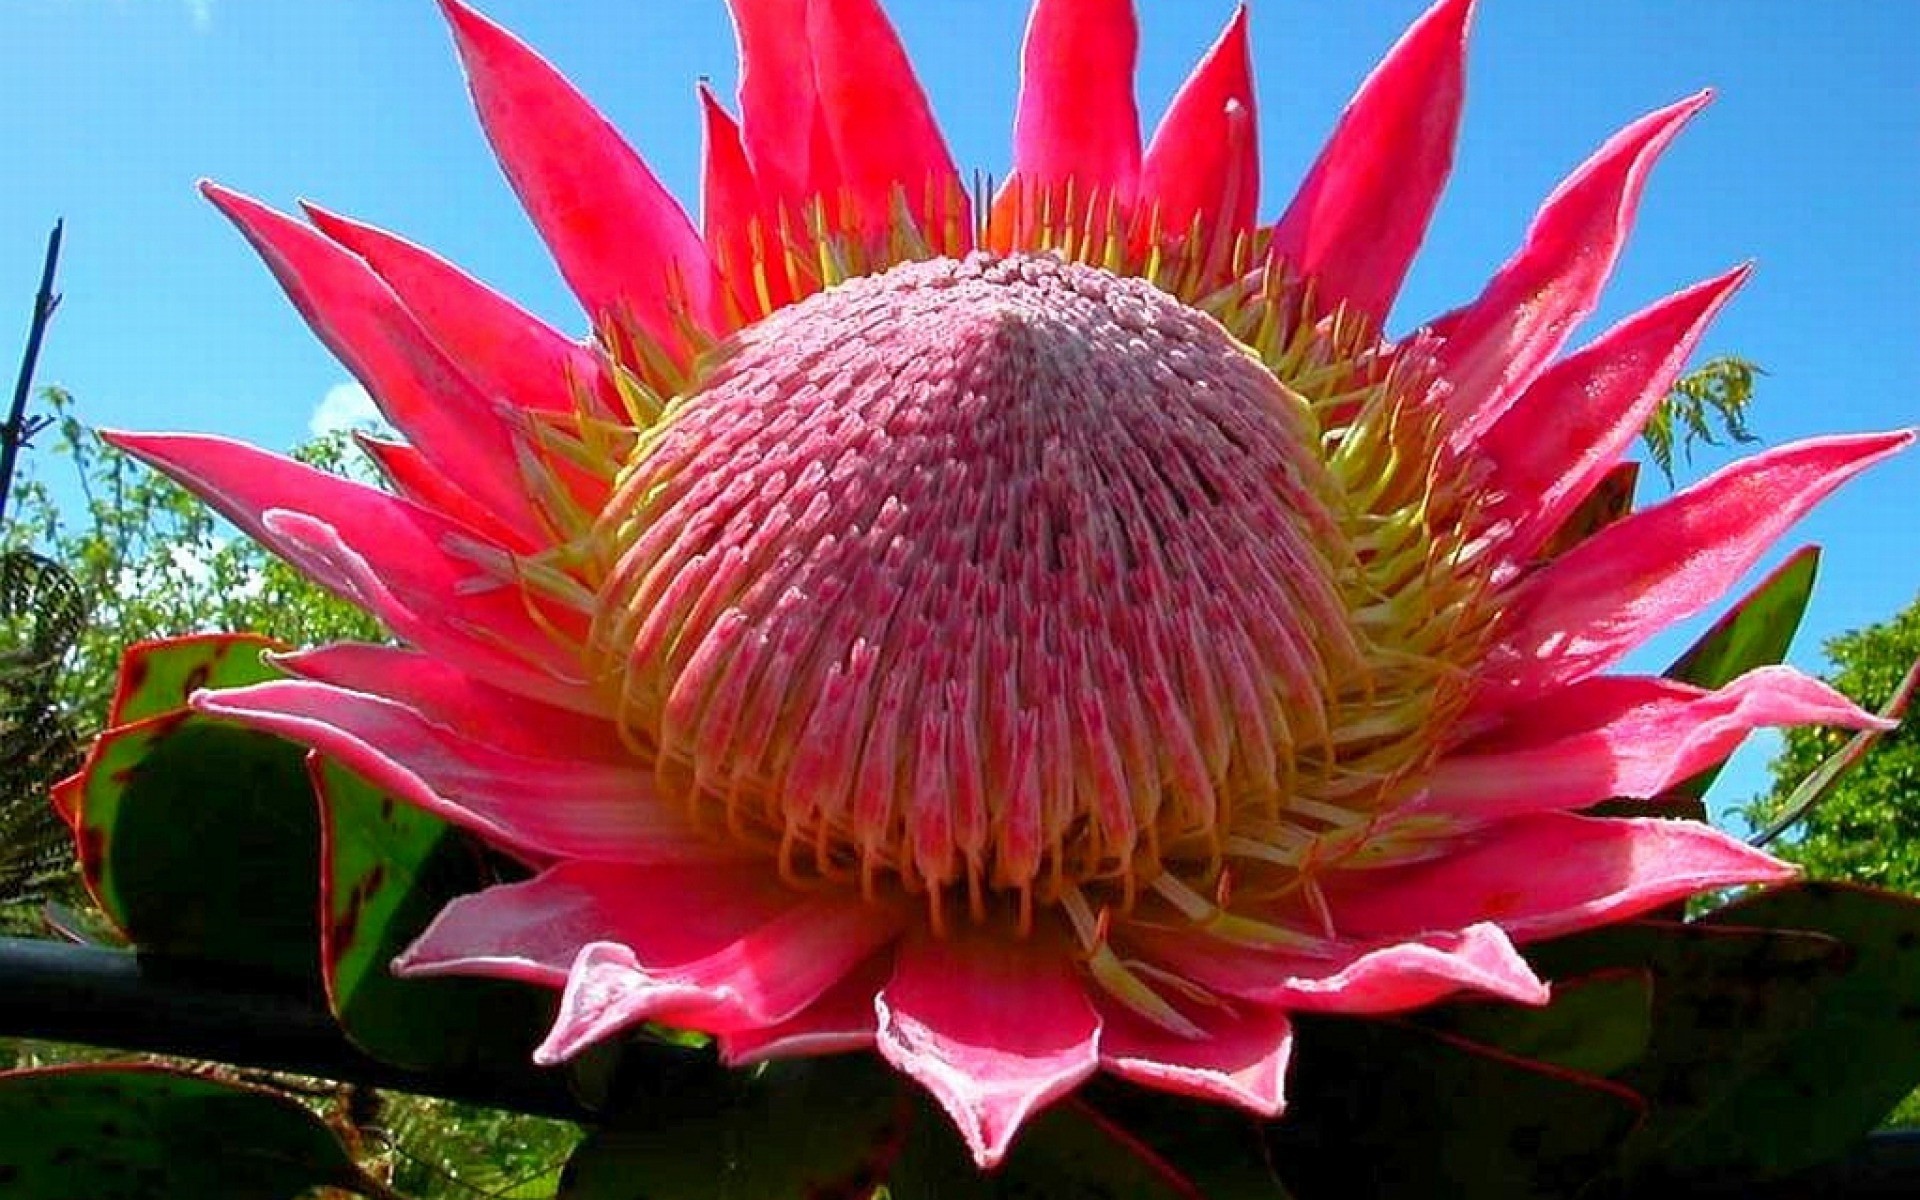 Pink Flower Of The Cactus Wallpaper And Image Pictures